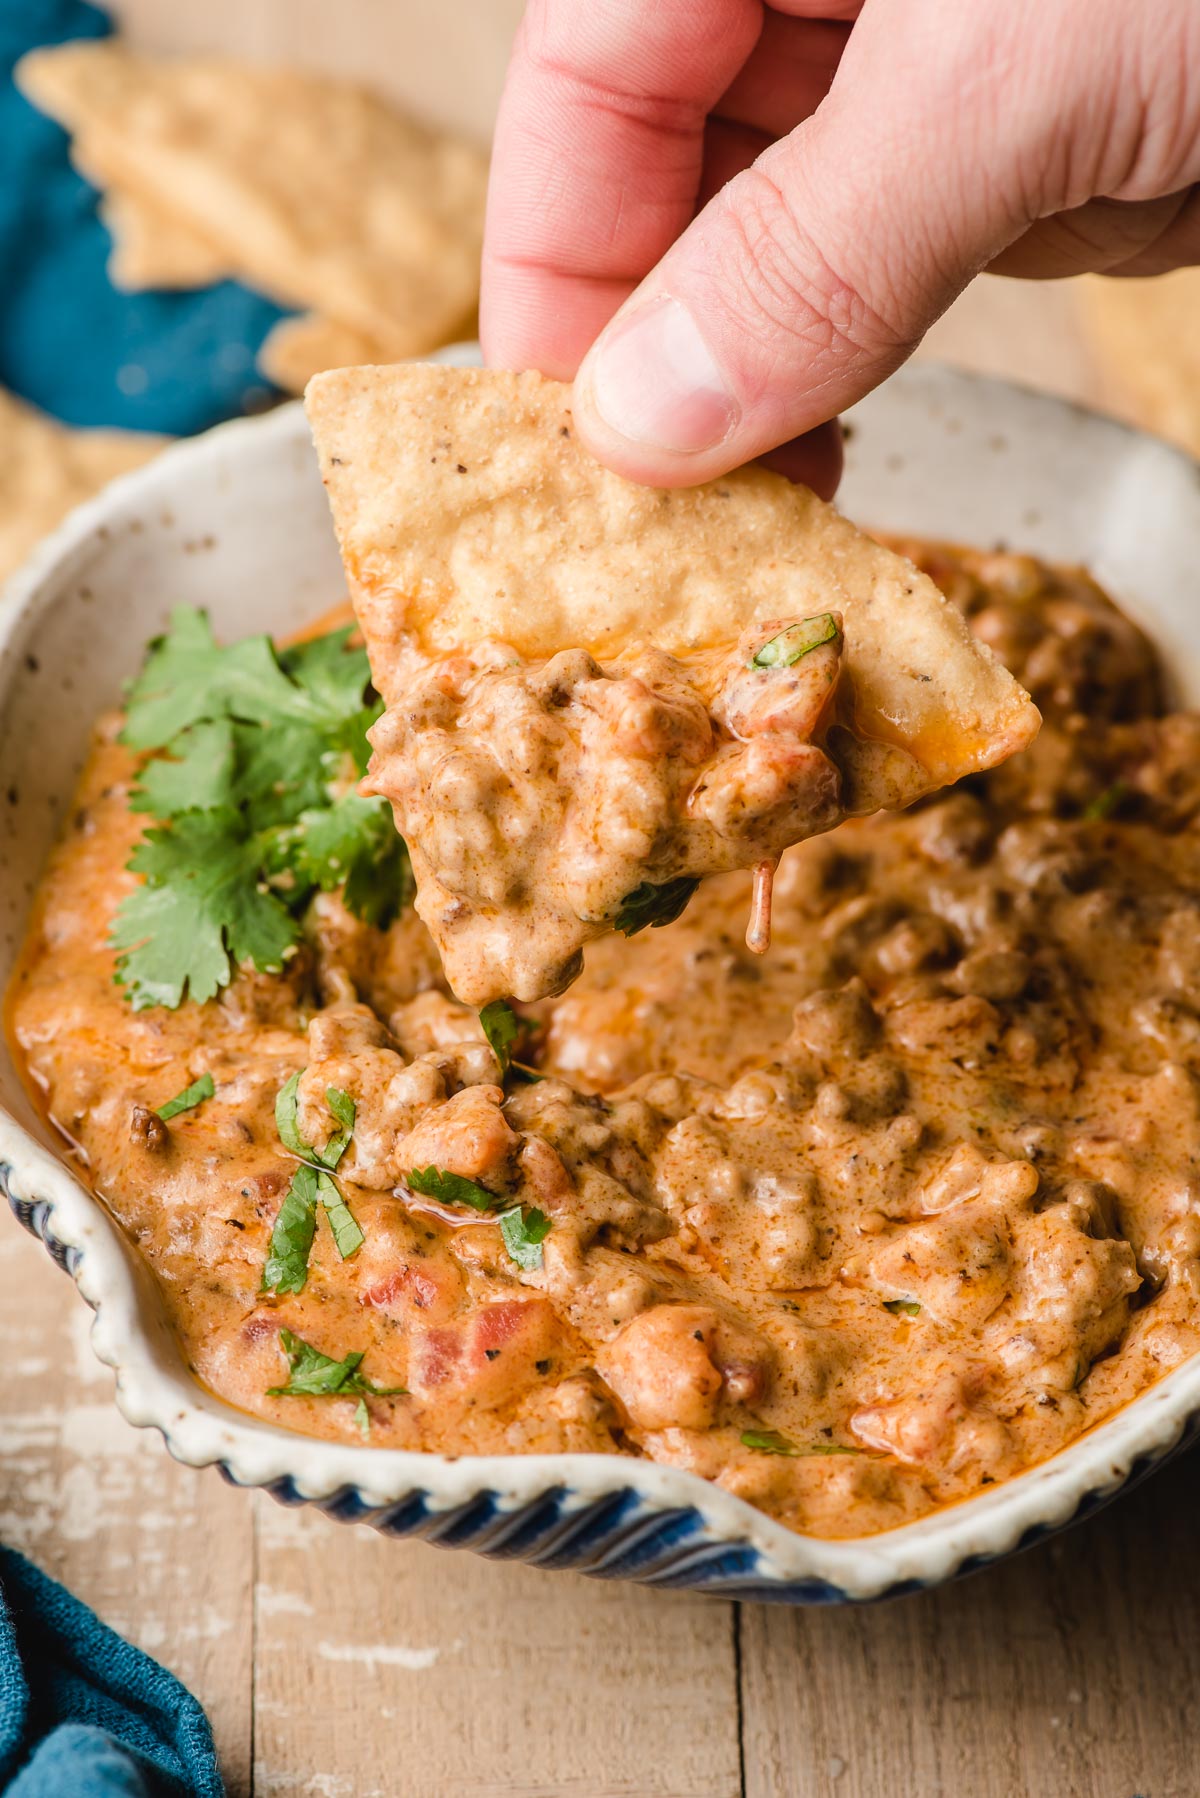 A chip takes a dip of ground beef queso out of a bowl.